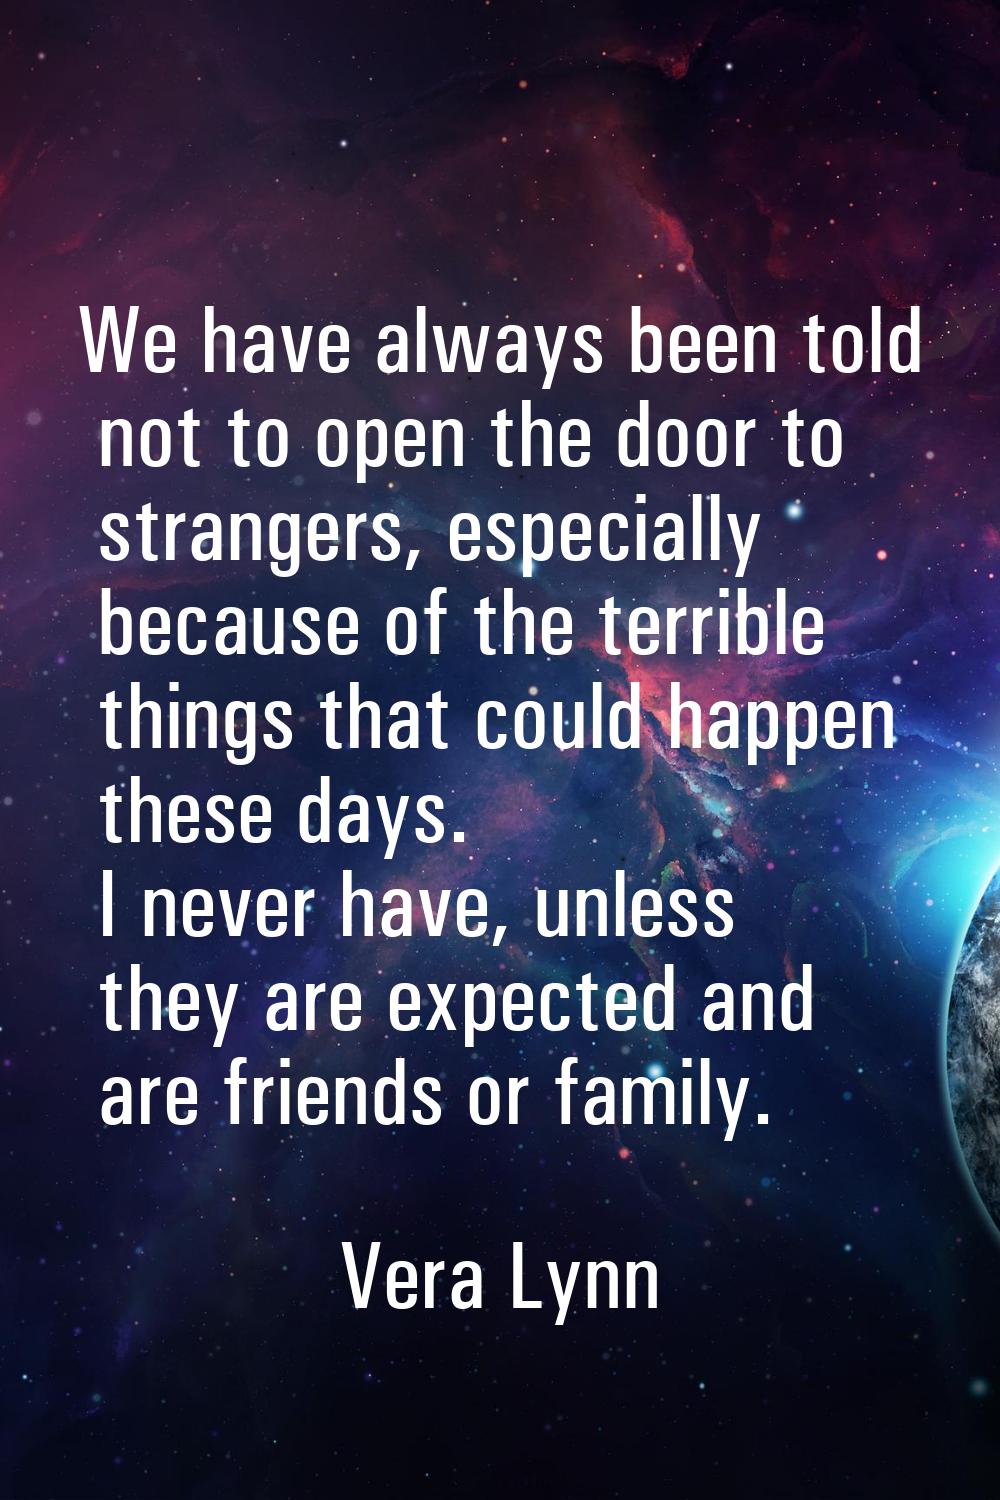 We have always been told not to open the door to strangers, especially because of the terrible thin